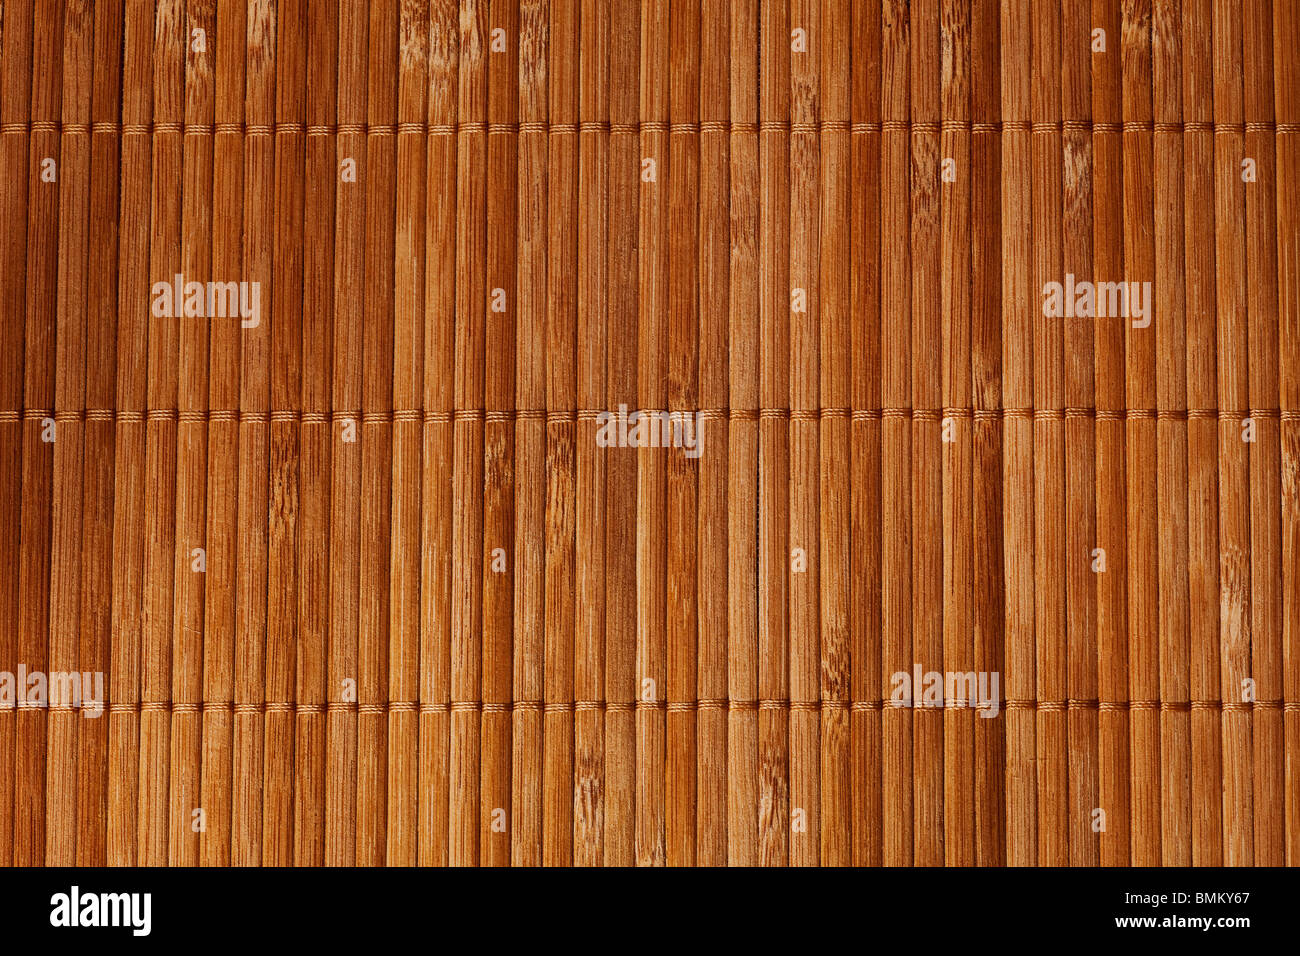 natural bamboo slatted mat background in brown tones Stock Photo